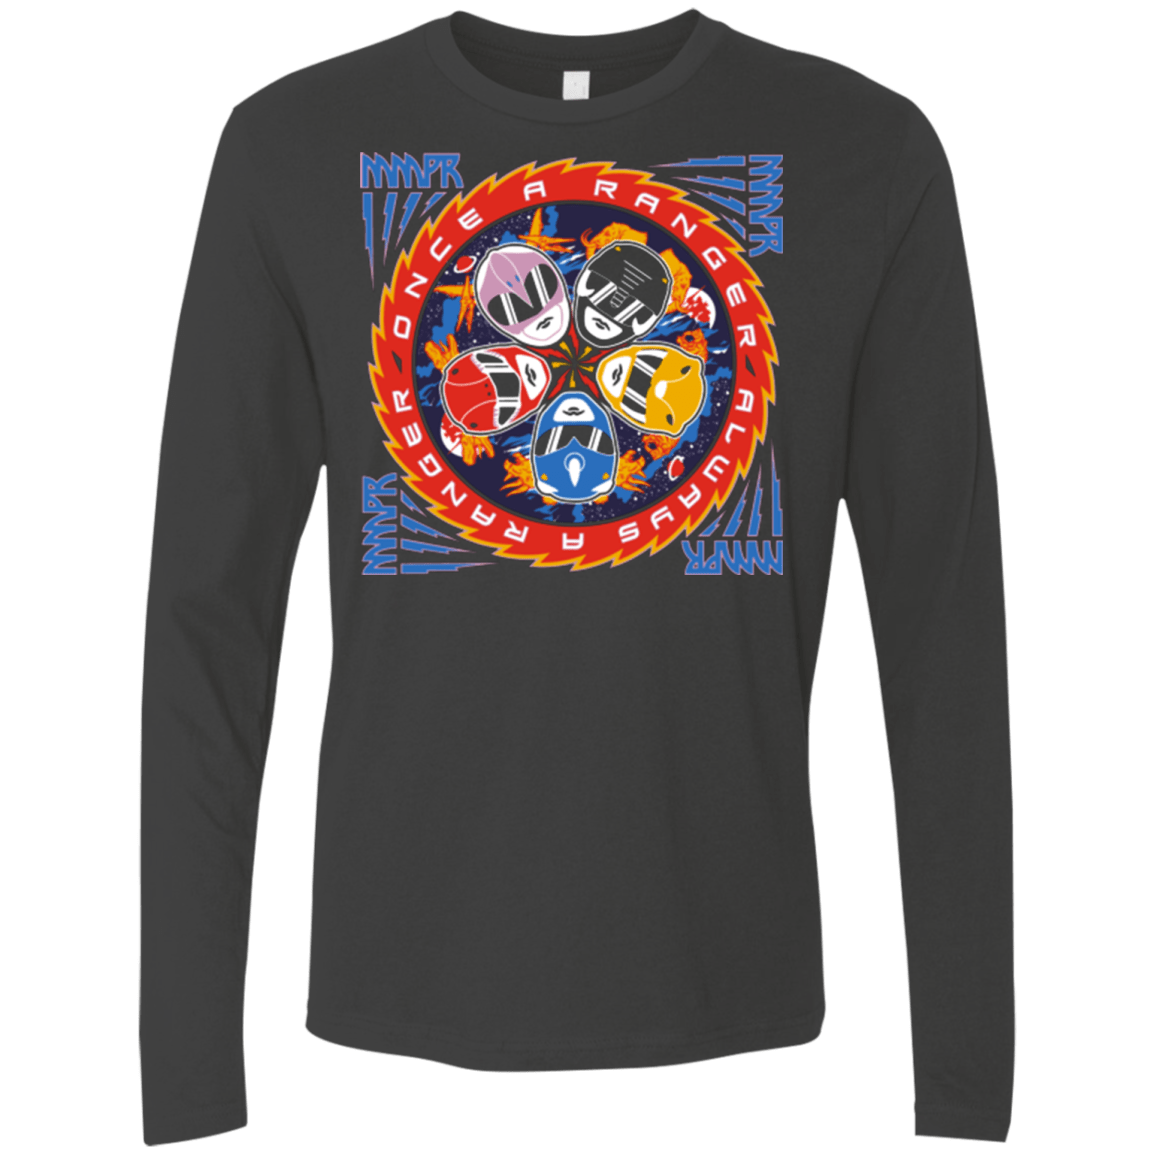 T-Shirts Heavy Metal / Small Ranger and Roll Over Men's Premium Long Sleeve